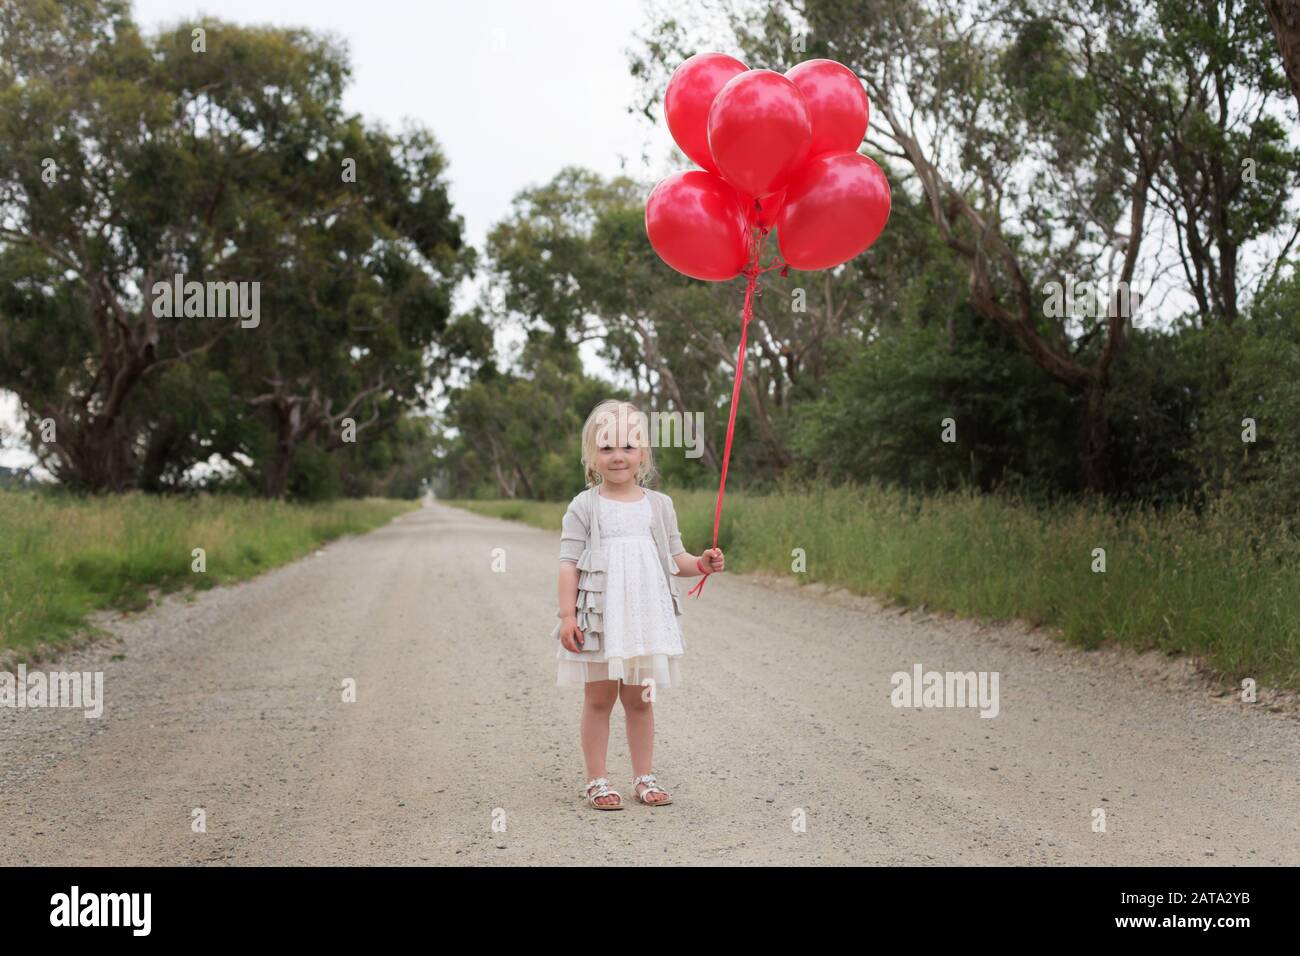 Australian Caucasian girl standing on a dirt road in the country holding red balloons Stock Photo